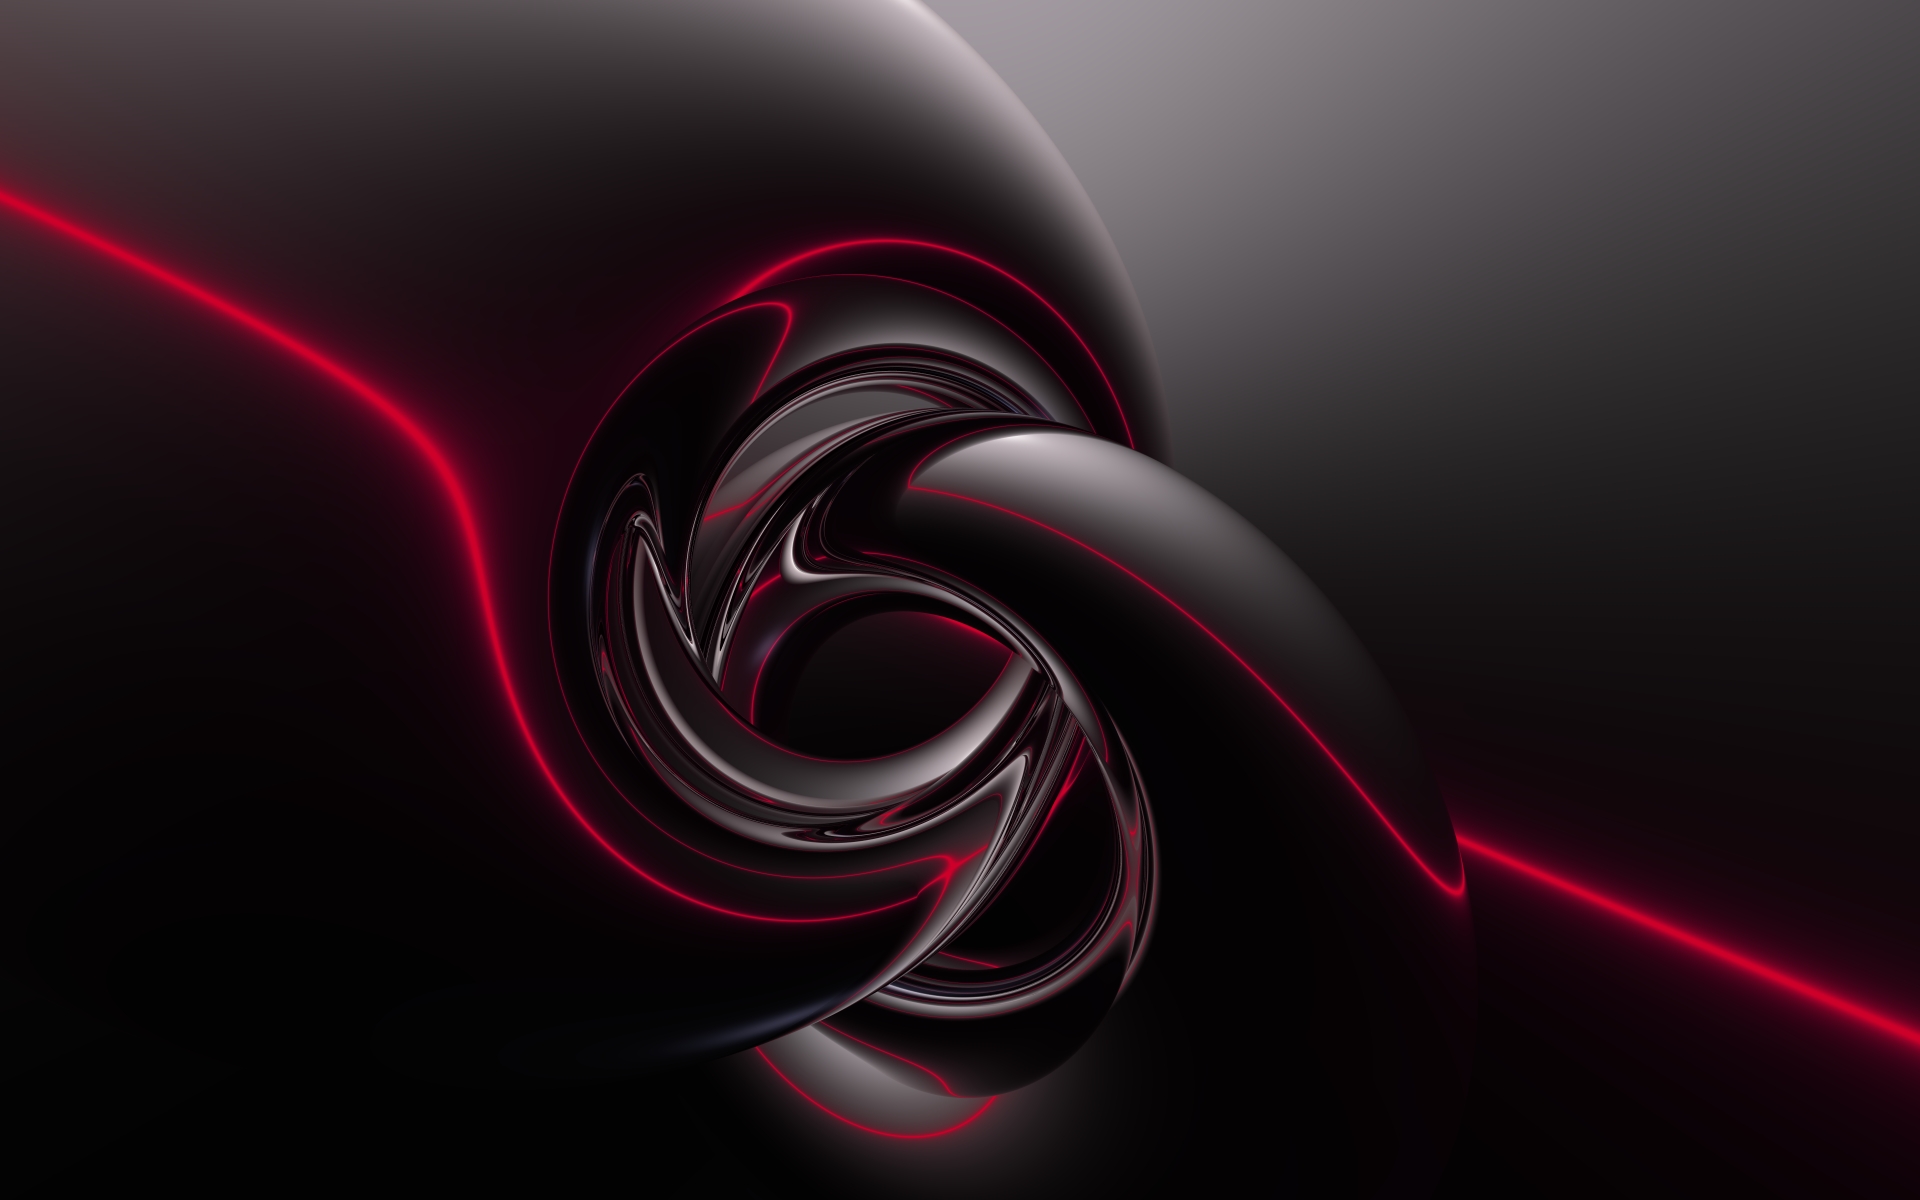 Black And Red Abstract Wallpaper HD Amazing Wallpaperz